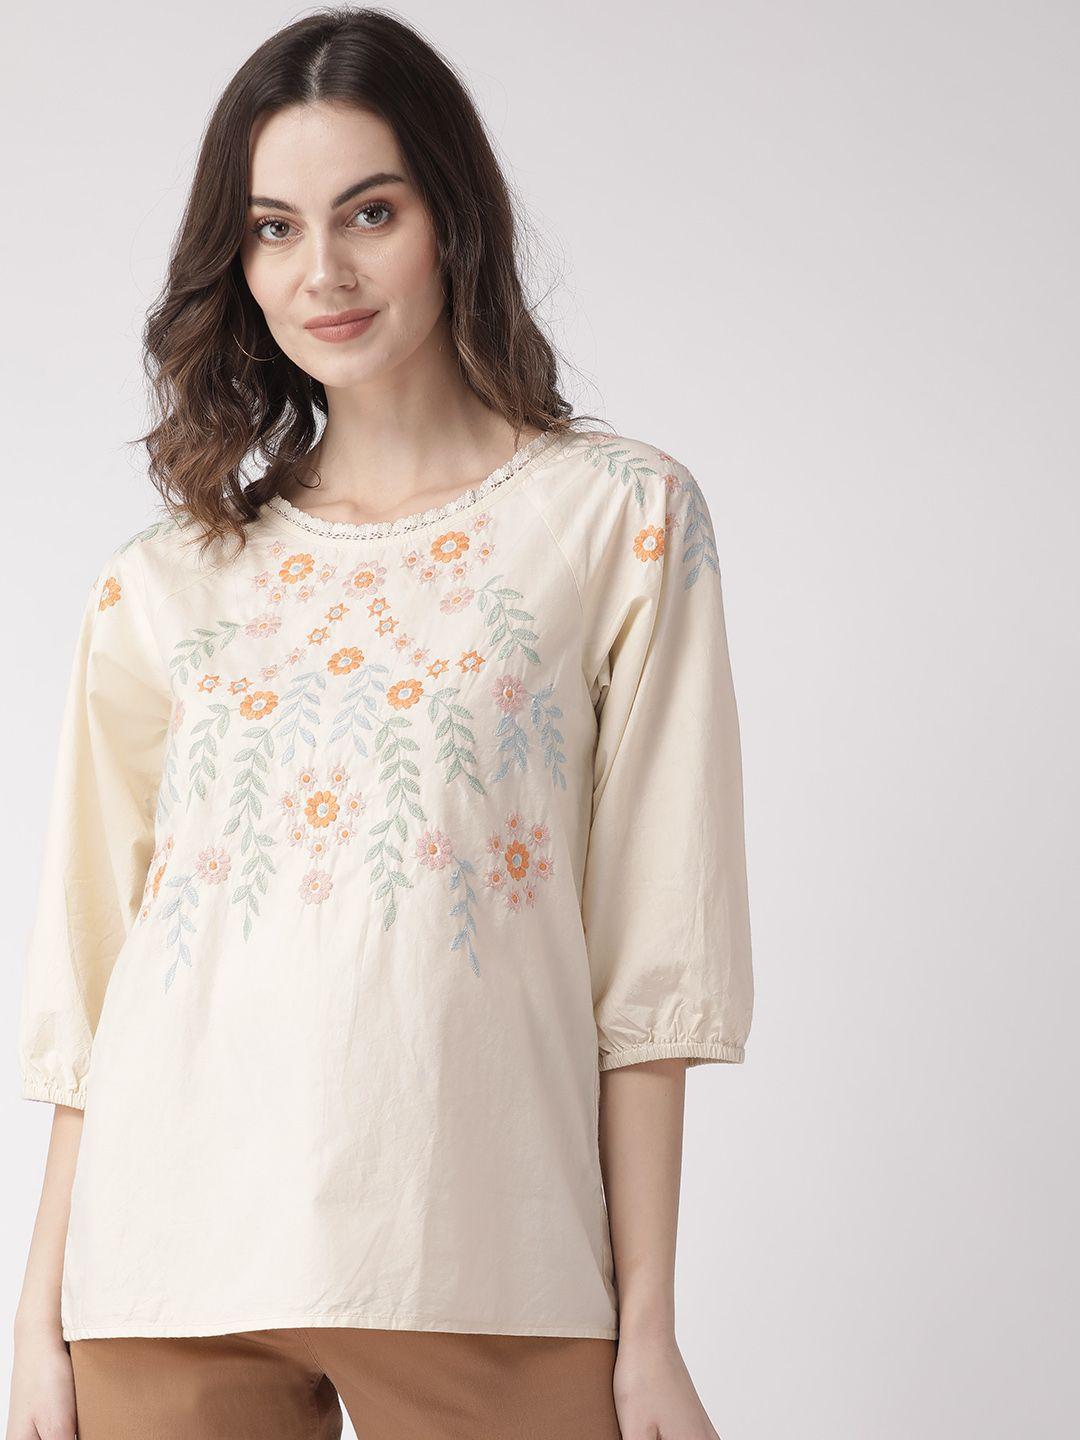 scoup-women-off-white-&-orange-floral-embroidered-pure-cotton-top